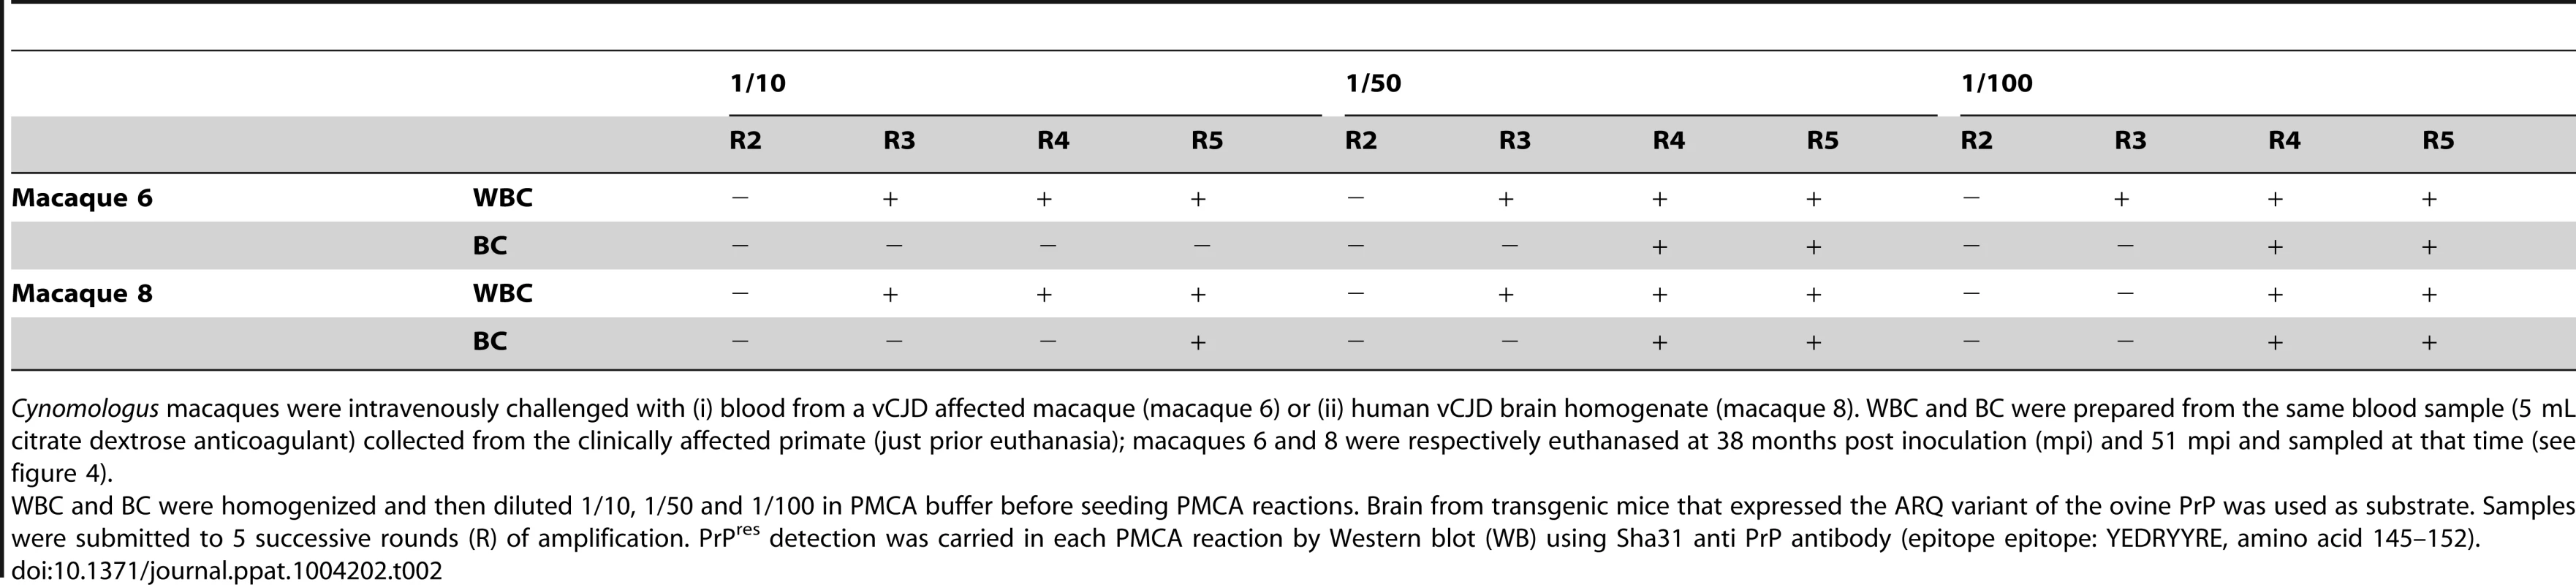 PrP<sup>res</sup> detection results in PMCA reactions seeded with white blood cells (WBC) or buffy coat (BC) from <i>Cynomologus</i> macaques clinically affected with vCJD.